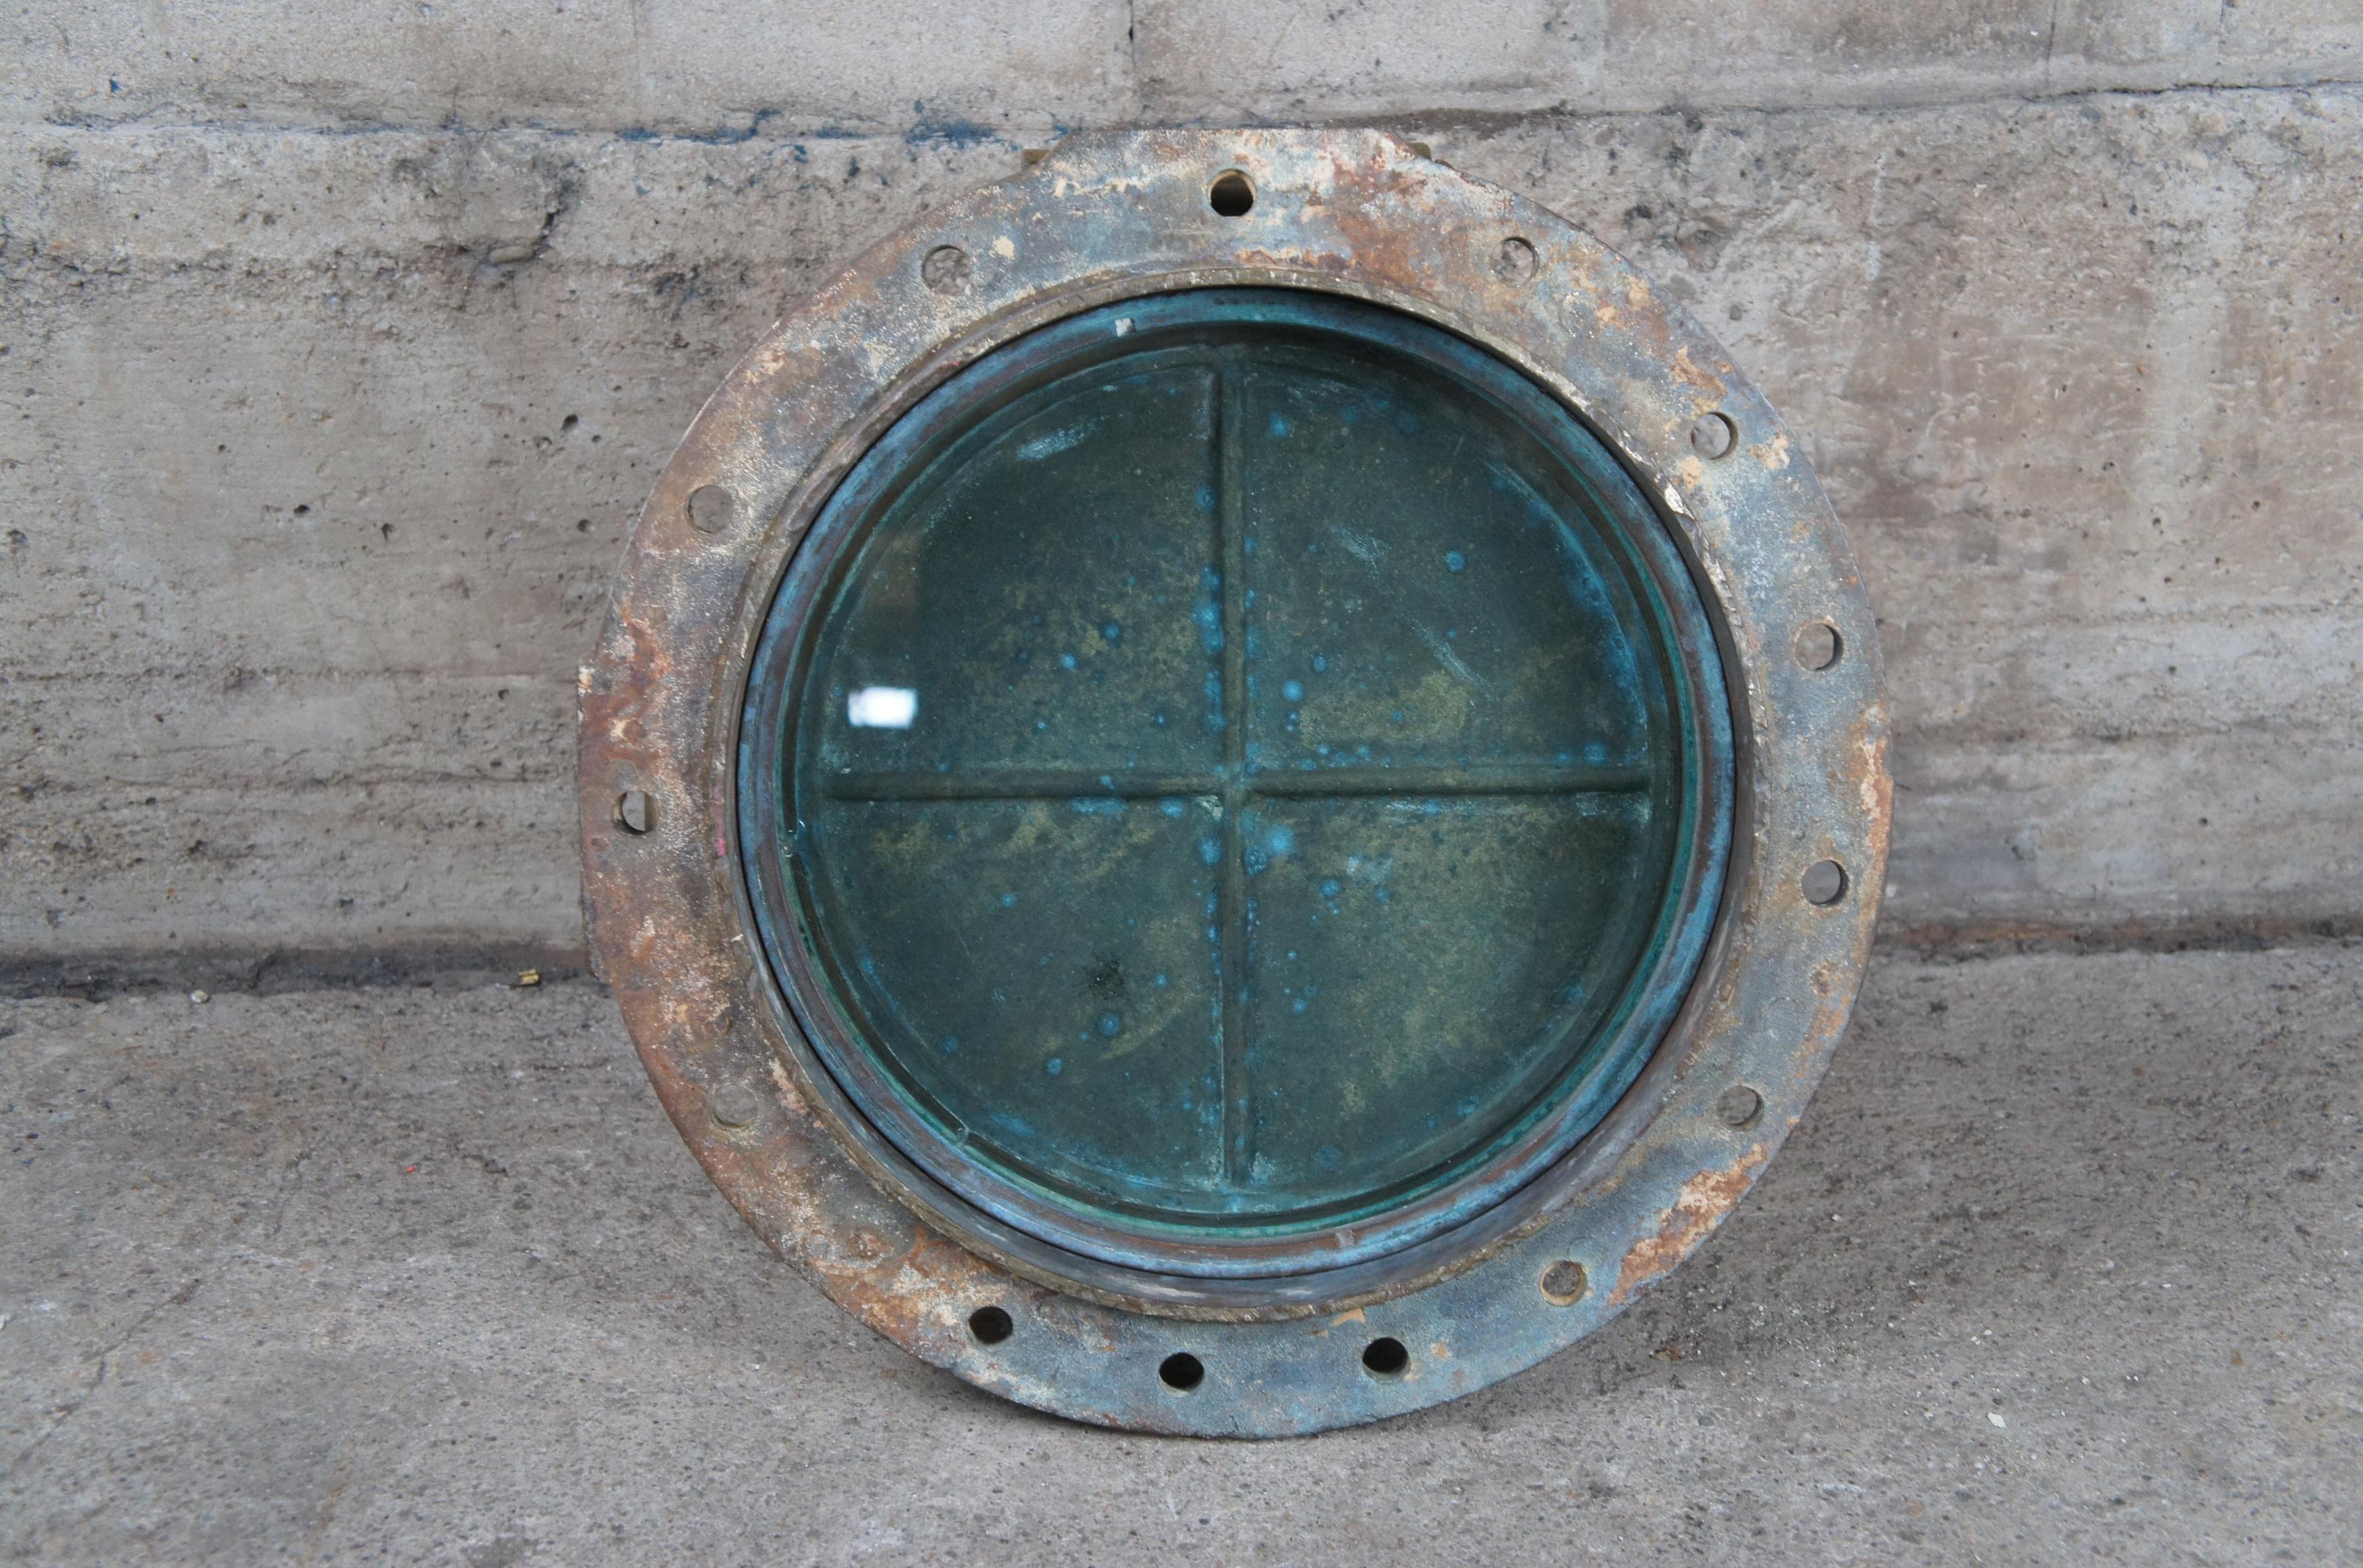 Early 20th Century Antique Solid Brass Ships Porthole Window Nautical Maritime19 For Sale 9